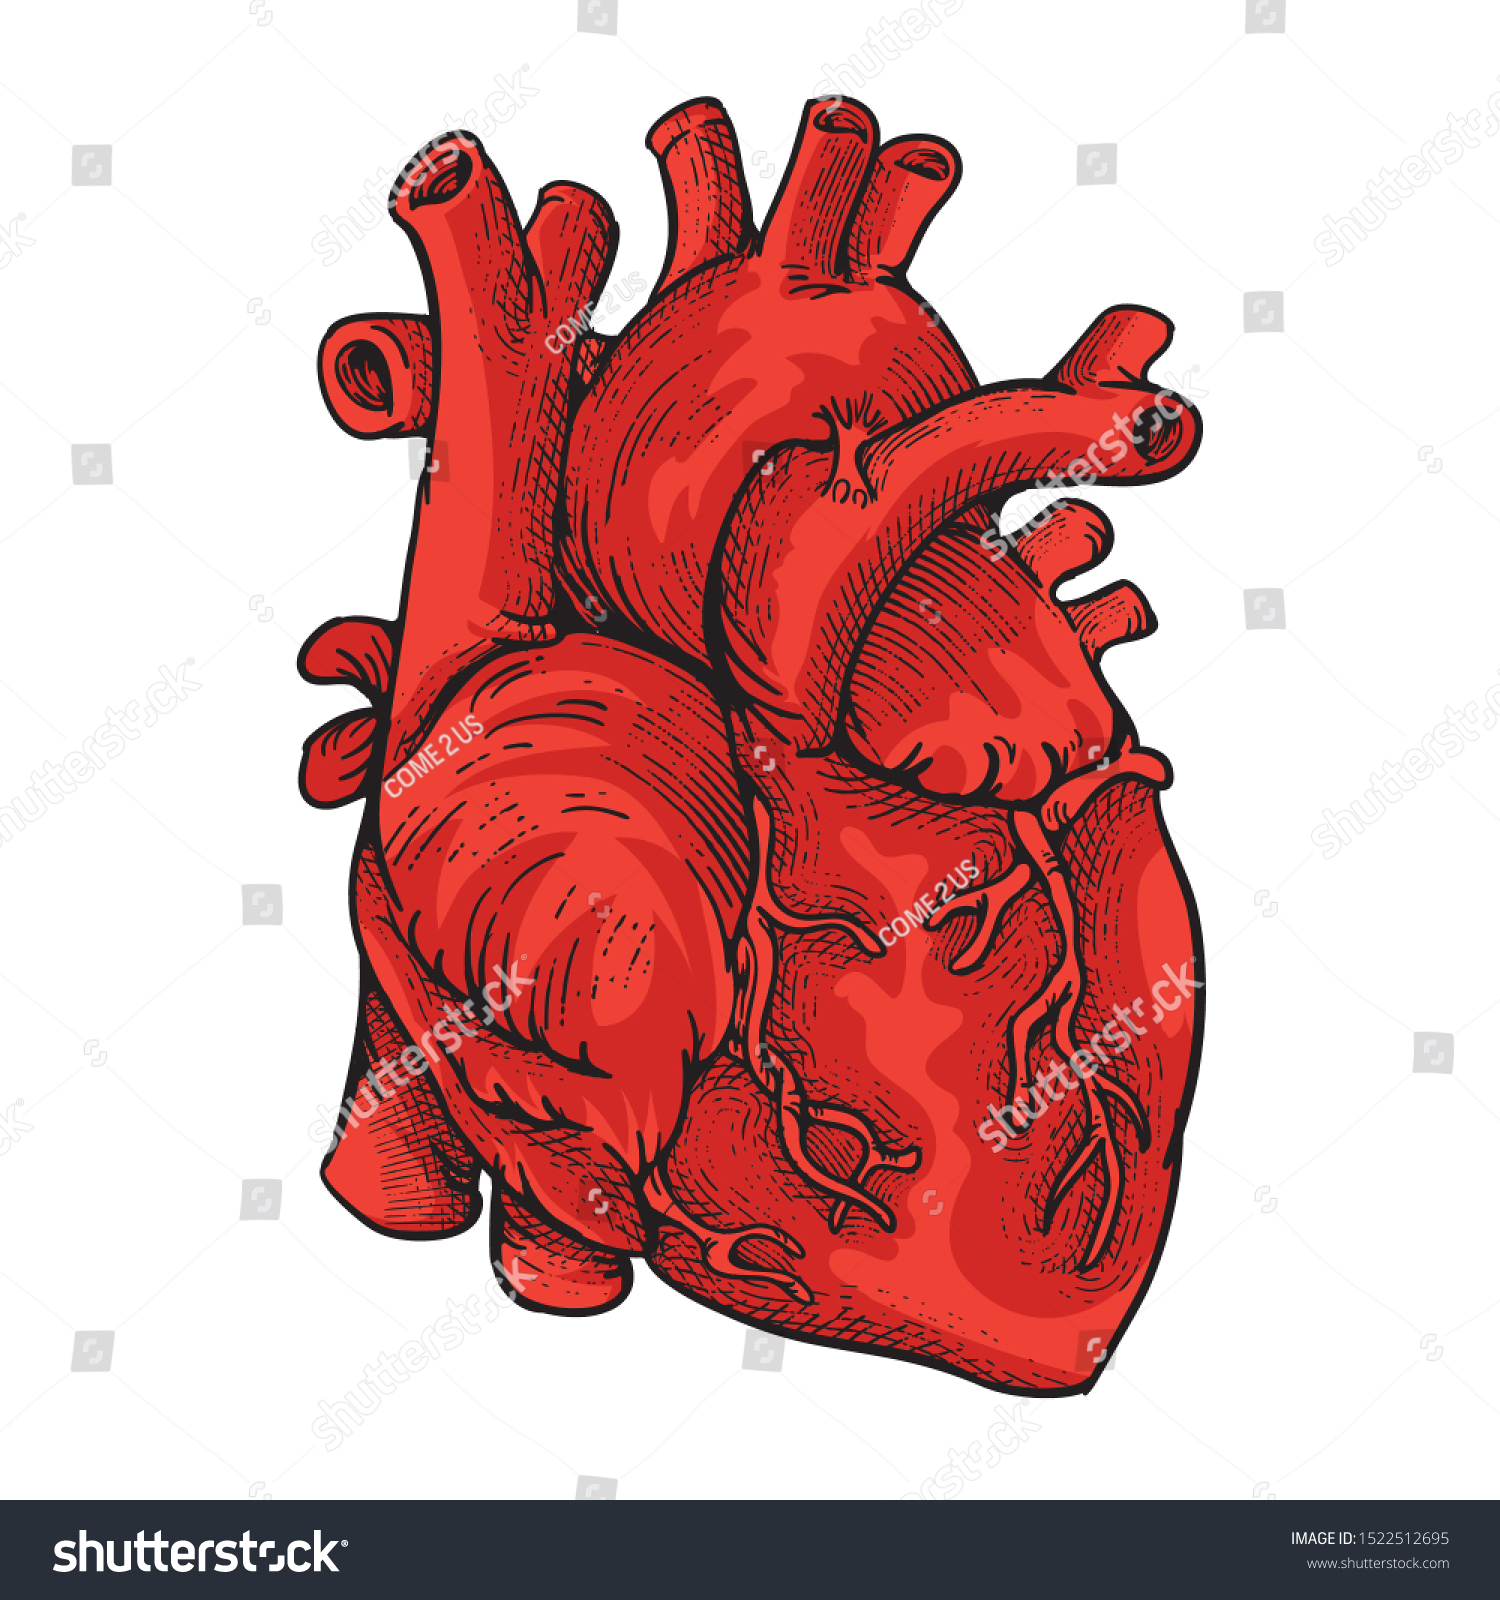 Heart Illustration Color Engraving Stock Vector (Royalty Free ...